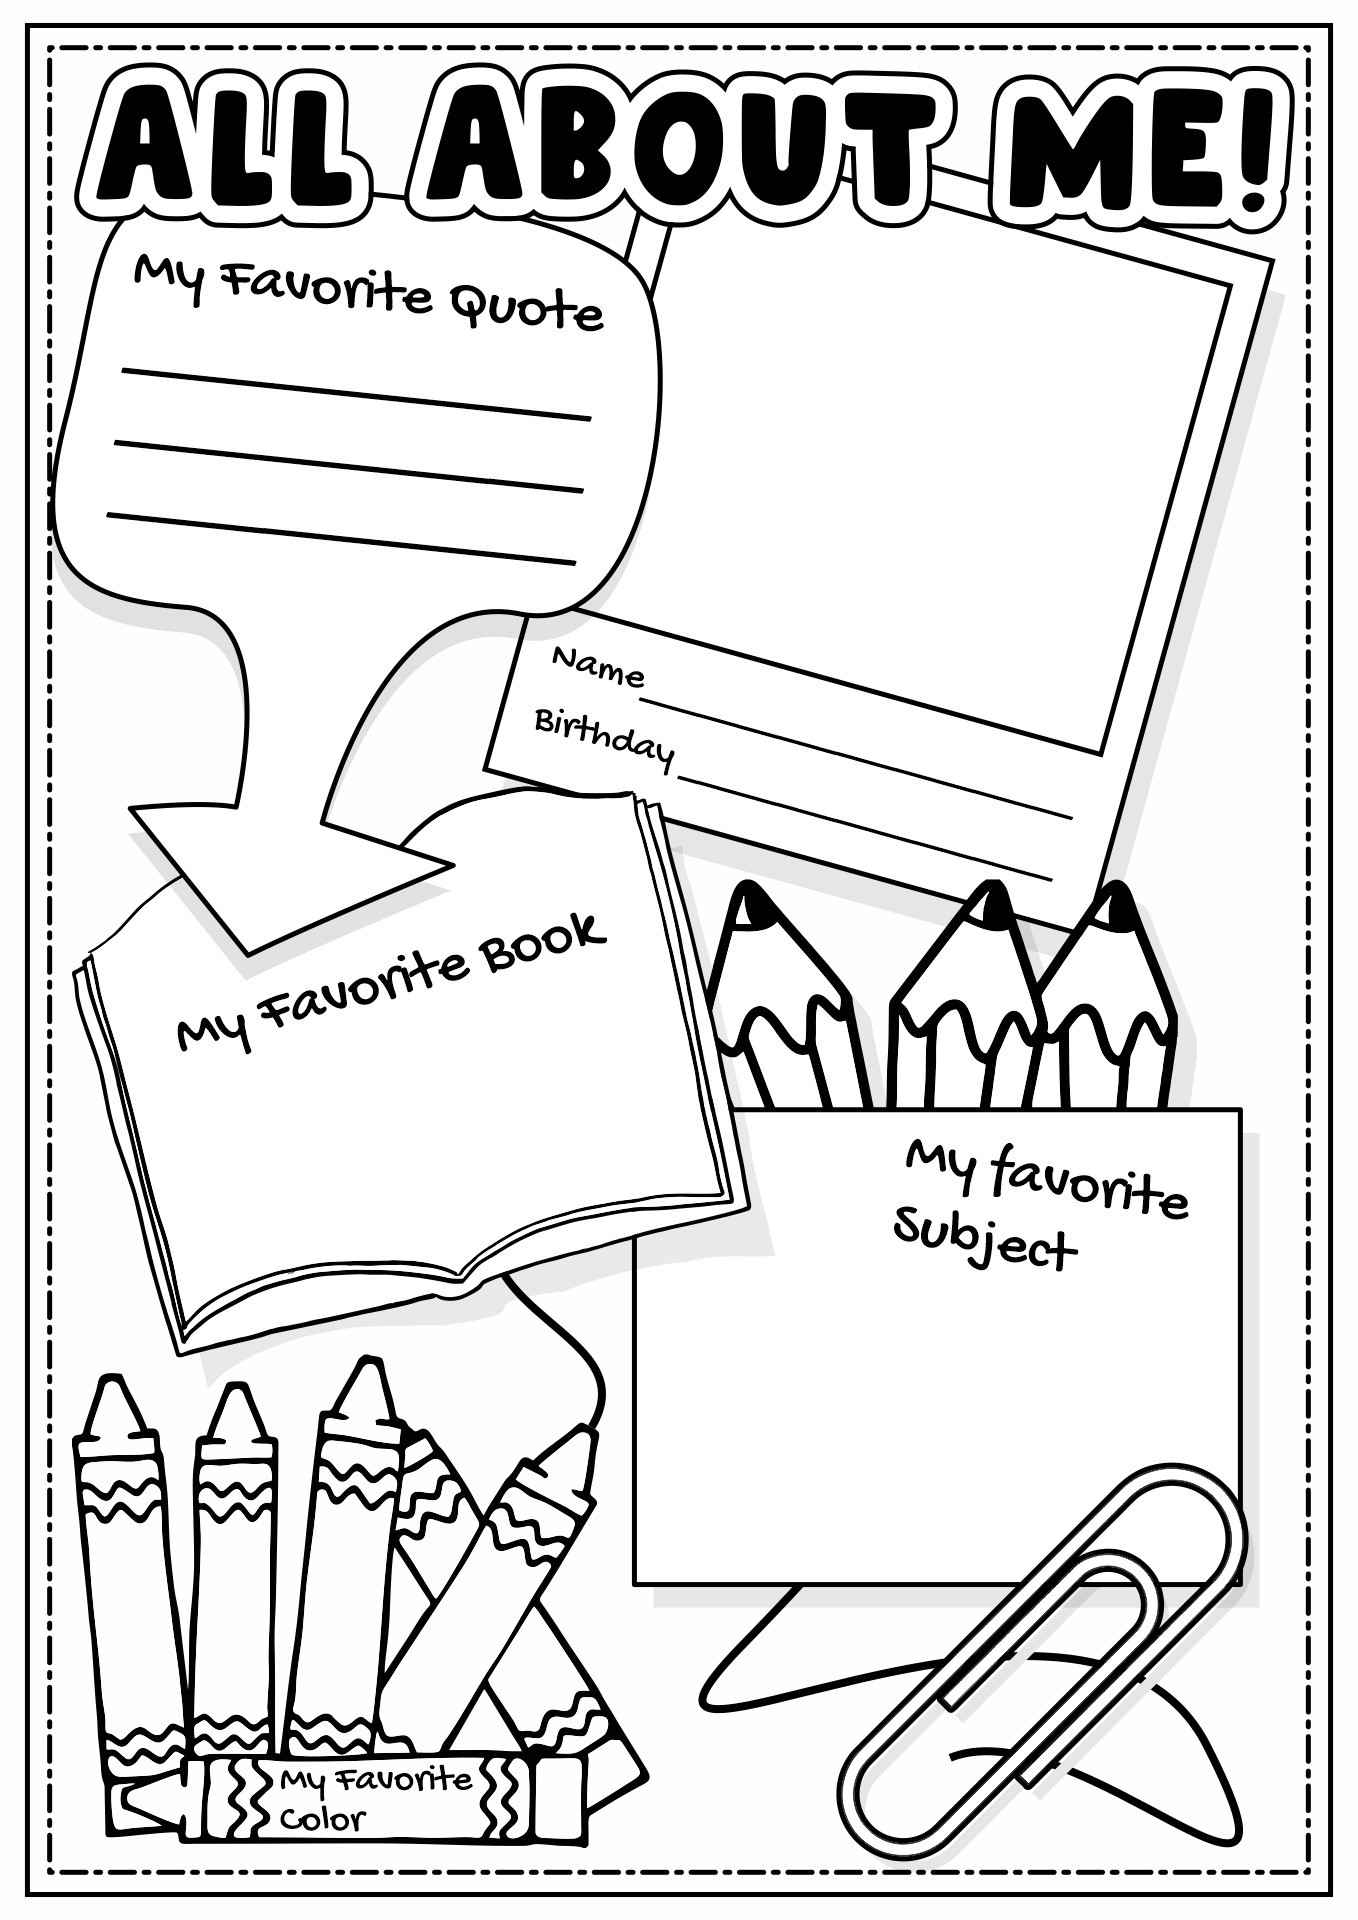 Free Back to School All About Me Activity Image